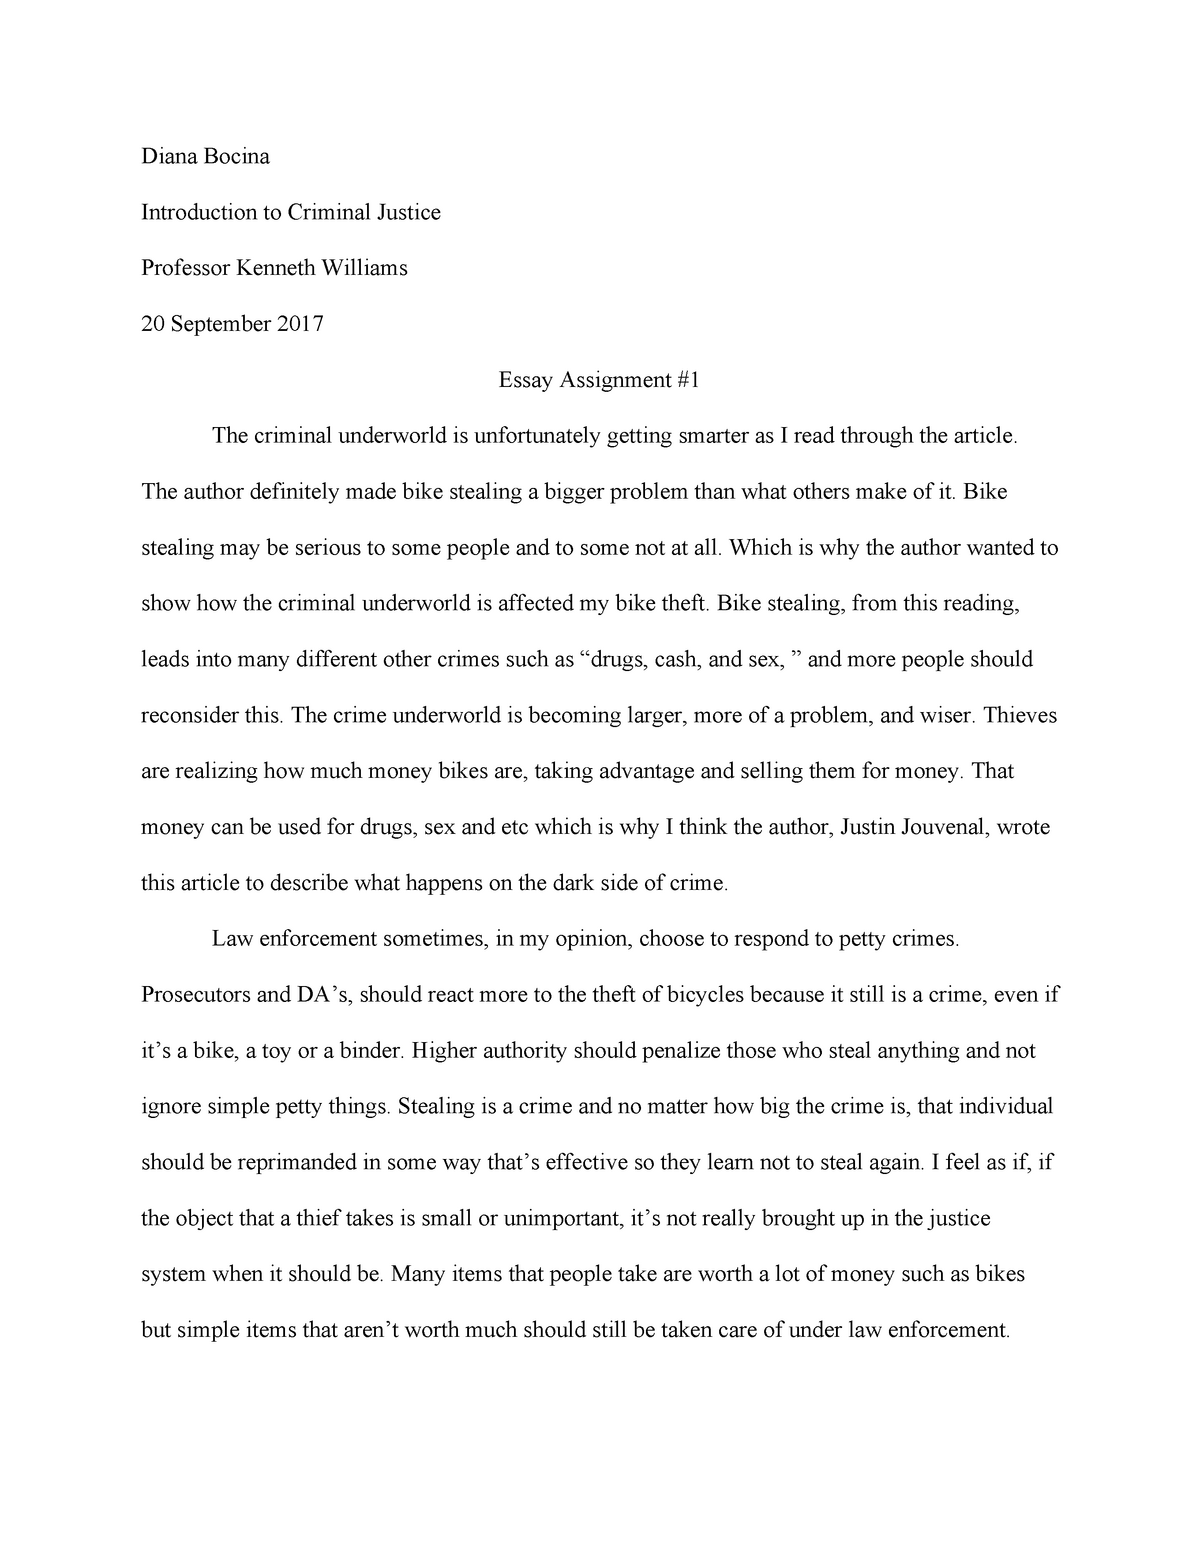 examples of criminal justice essays